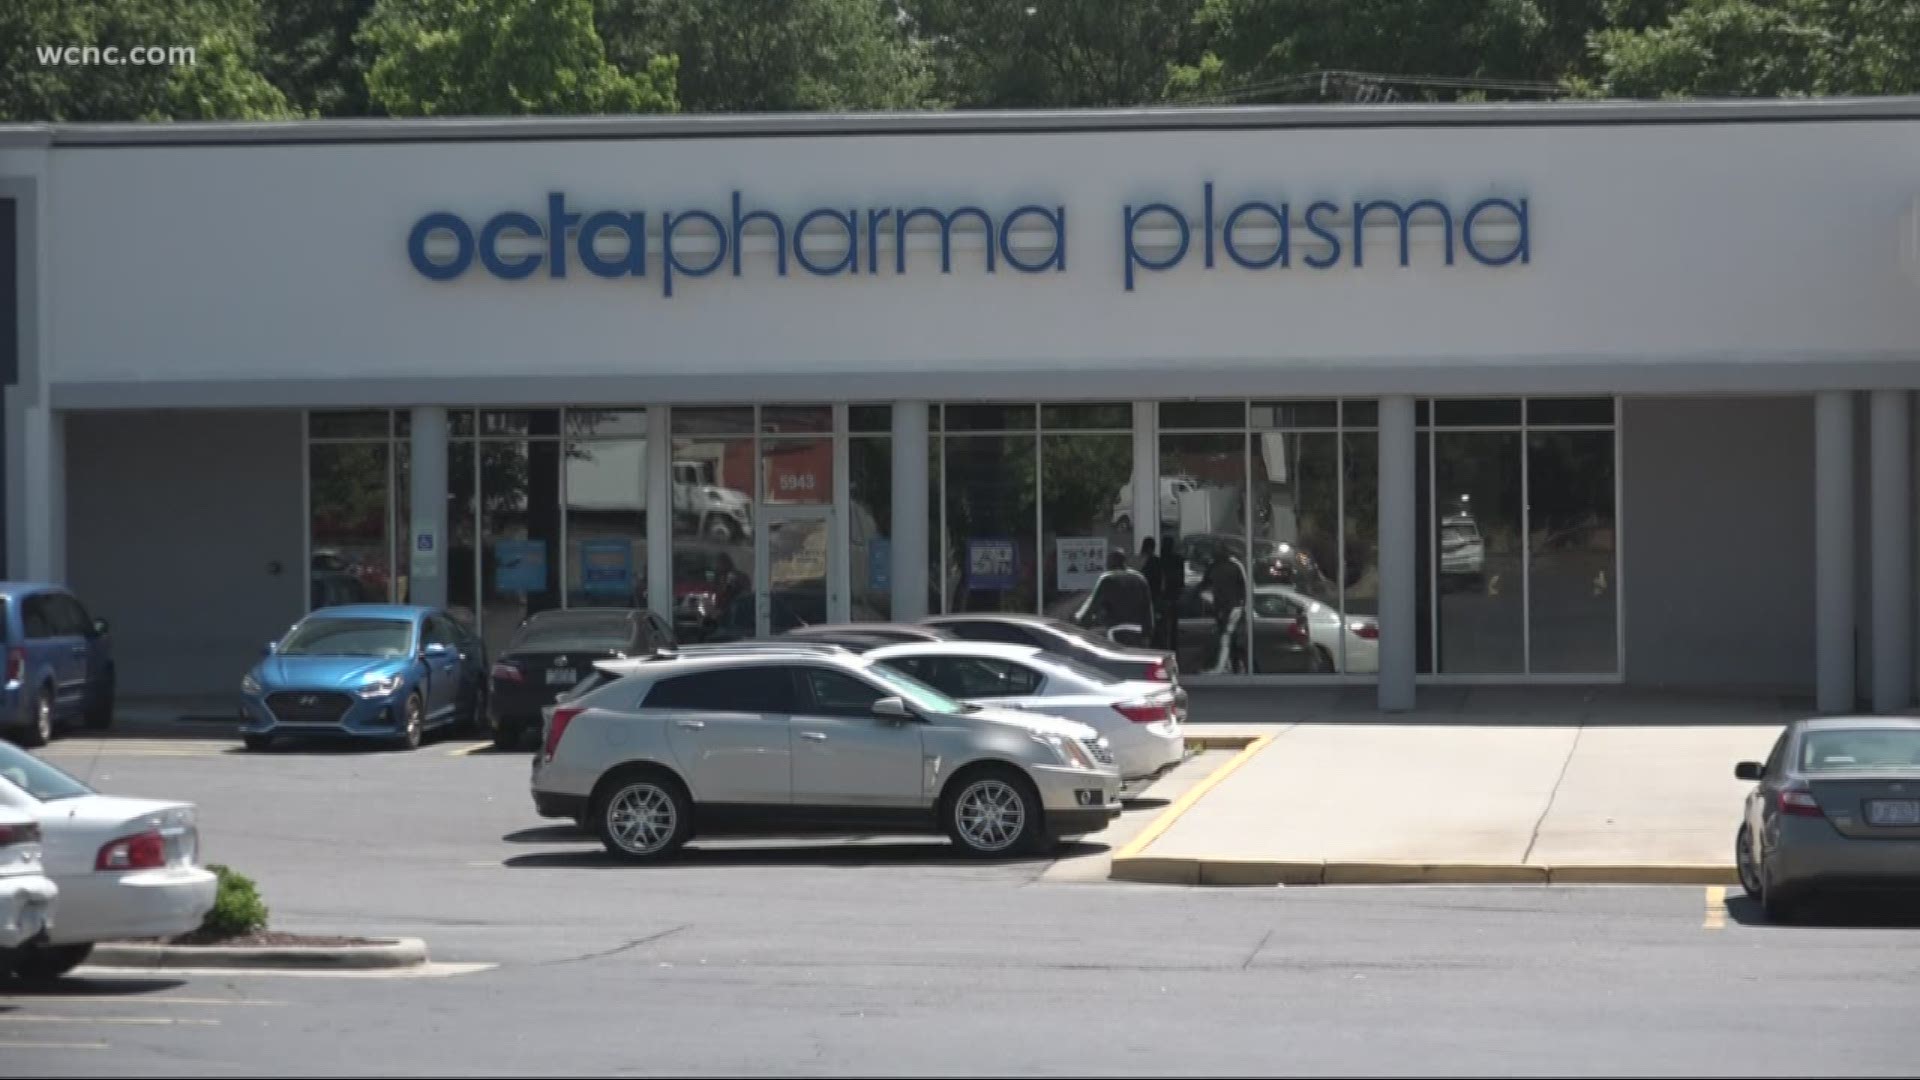 An attorney who has filed suit against Octapharma Plasma Incorporated said he's heard from 10 people with similar stories and believes false-positive testing is happening here in North Carolina.